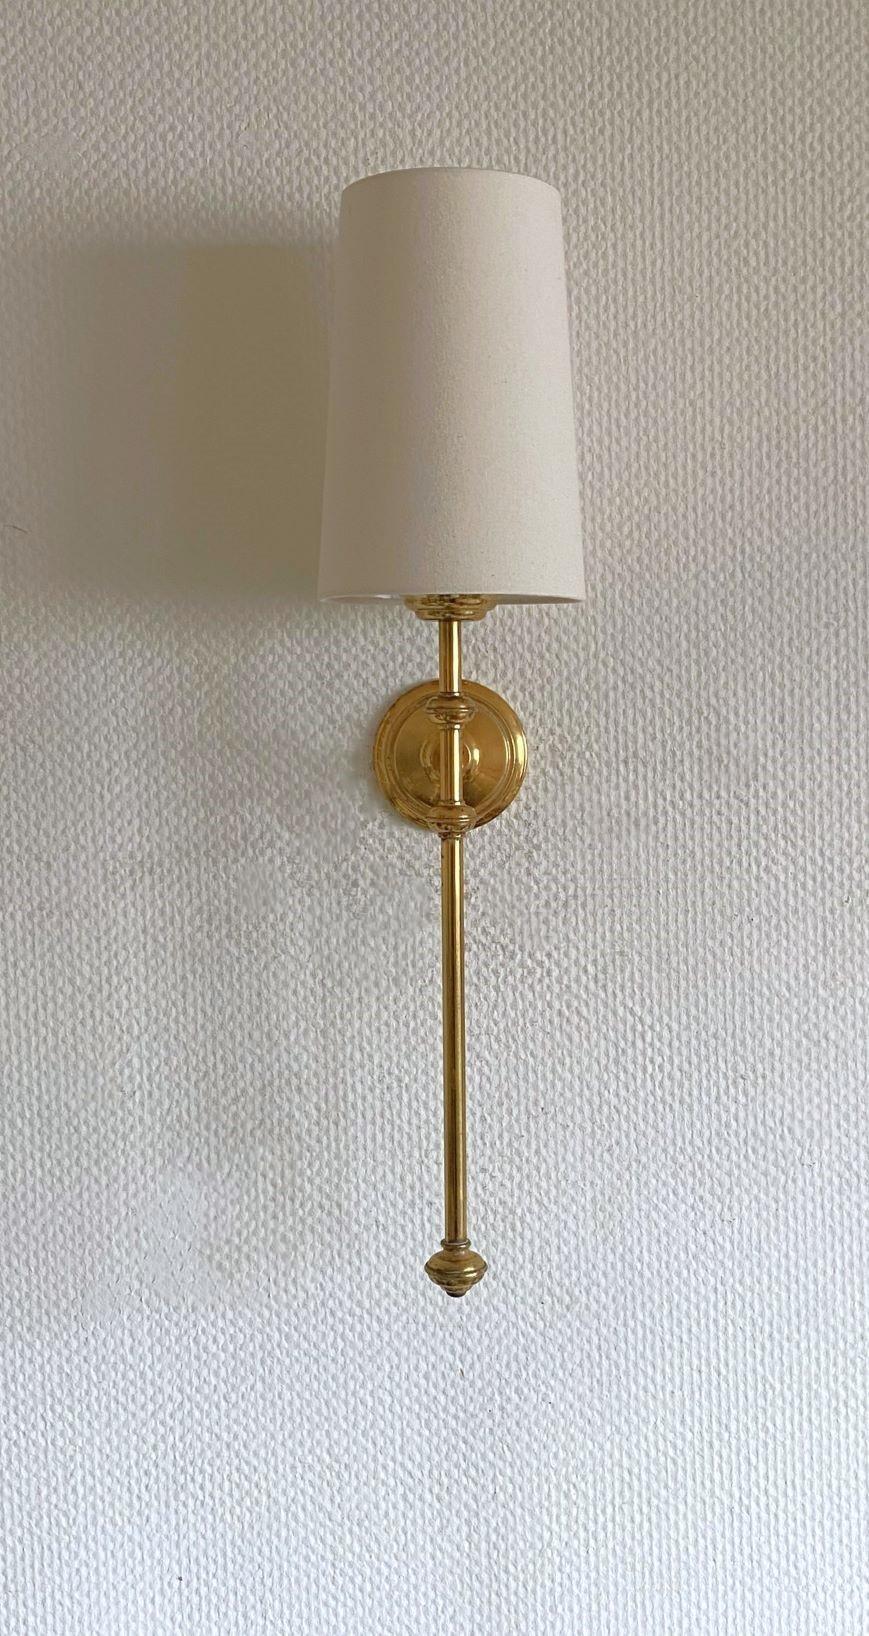 Art Deco Pair of French Maison Jansen Style Brass Wall Sconces, Wall Lights